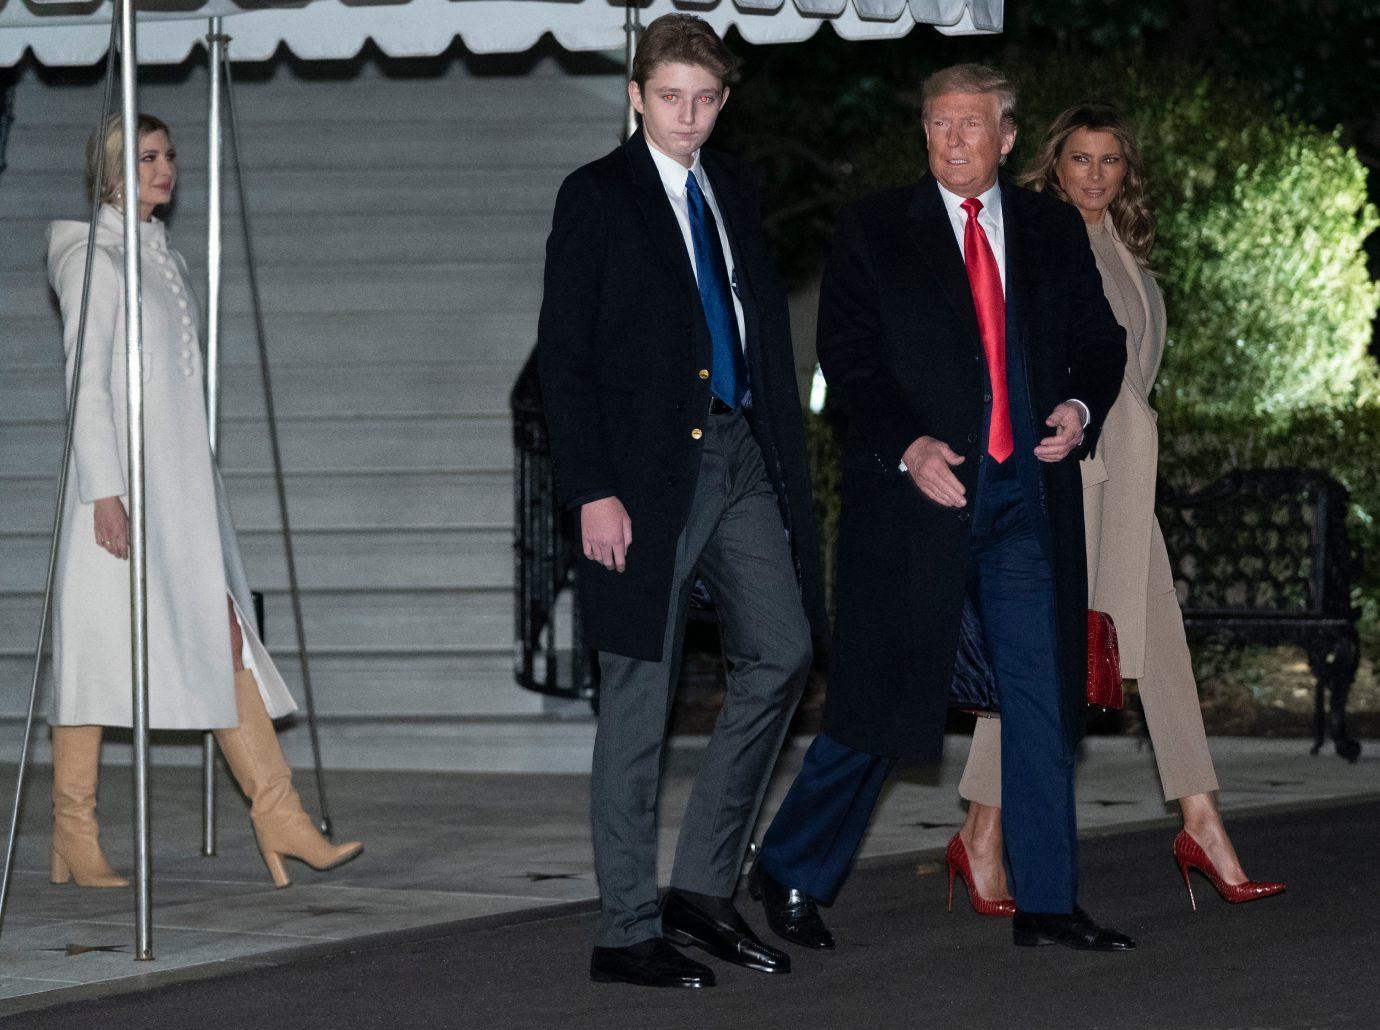 Melania Trump May Move To Wherever Son Barron Goes To College: Source